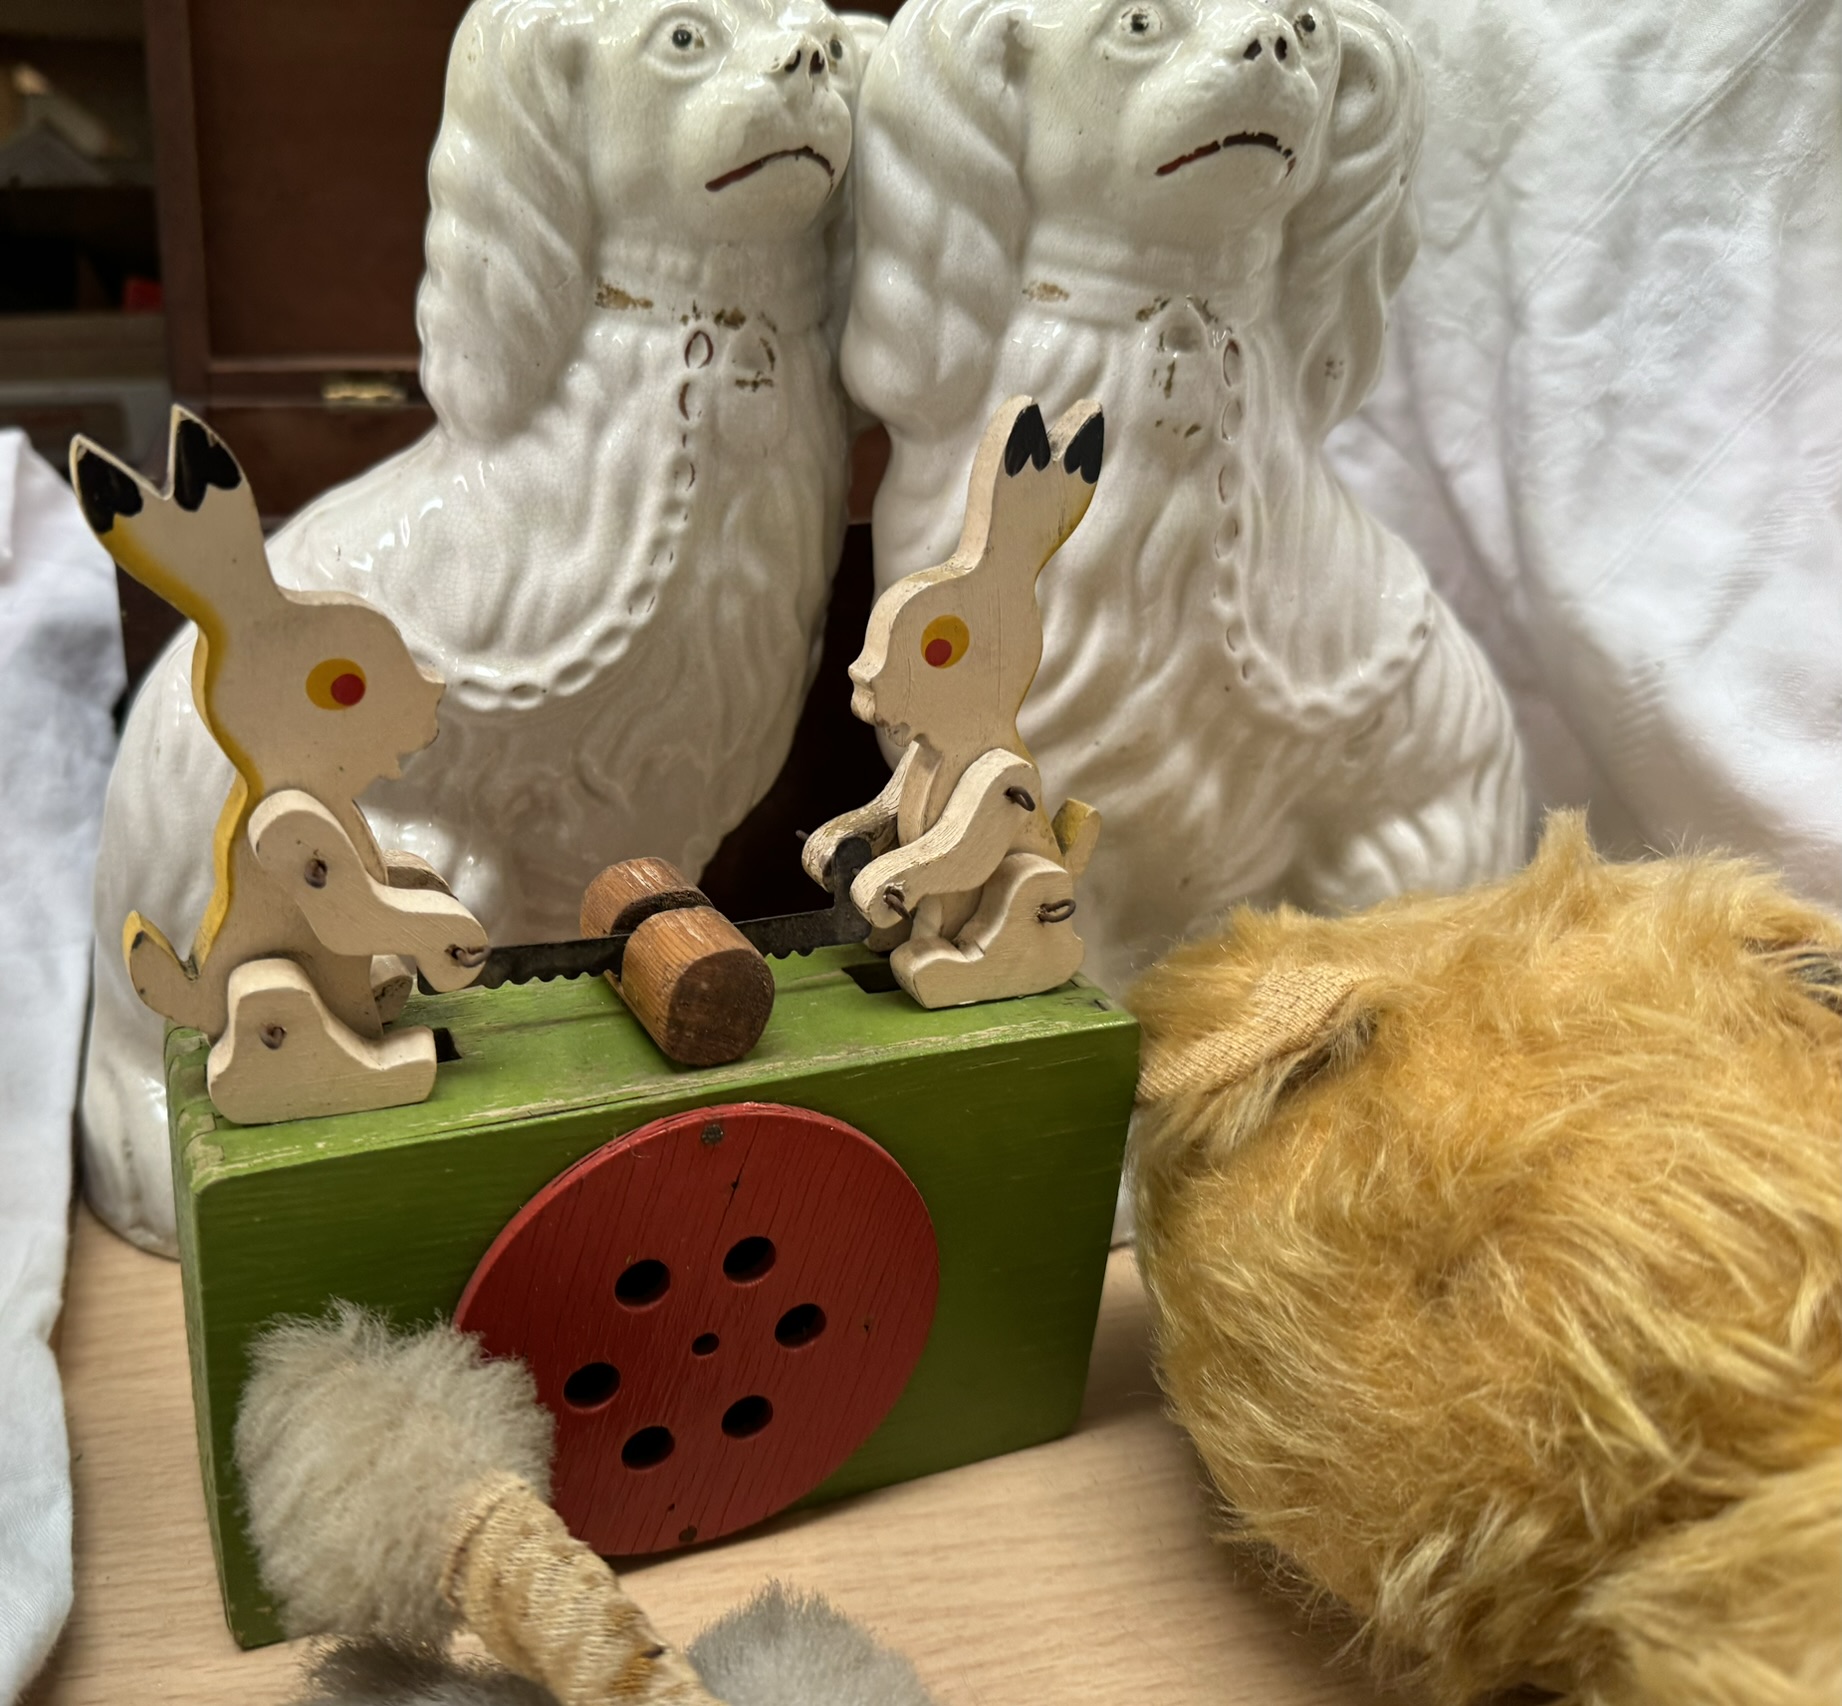 A wooden toy depicting two rabbits sawing together with an automaton dog, a teddy bear, - Image 3 of 3